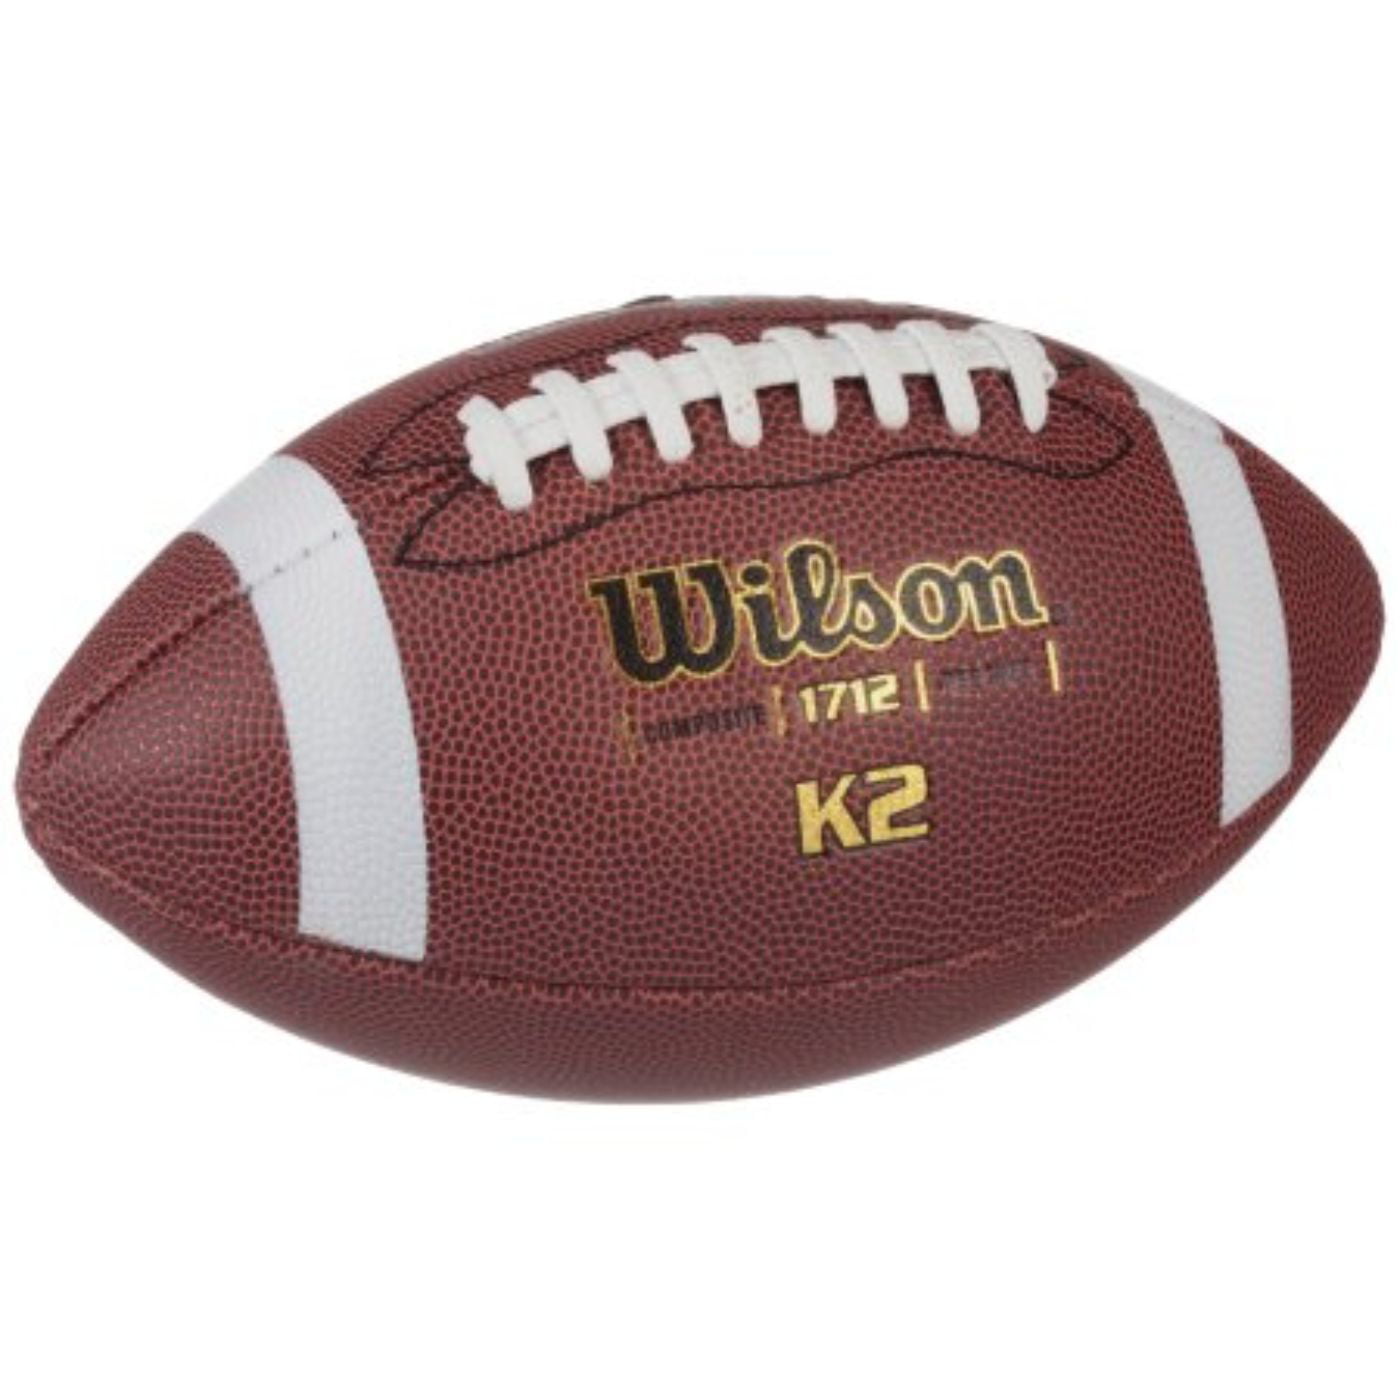 NEW Wilson TDY Composite Youth Size Game Football Piloflex Superskin 